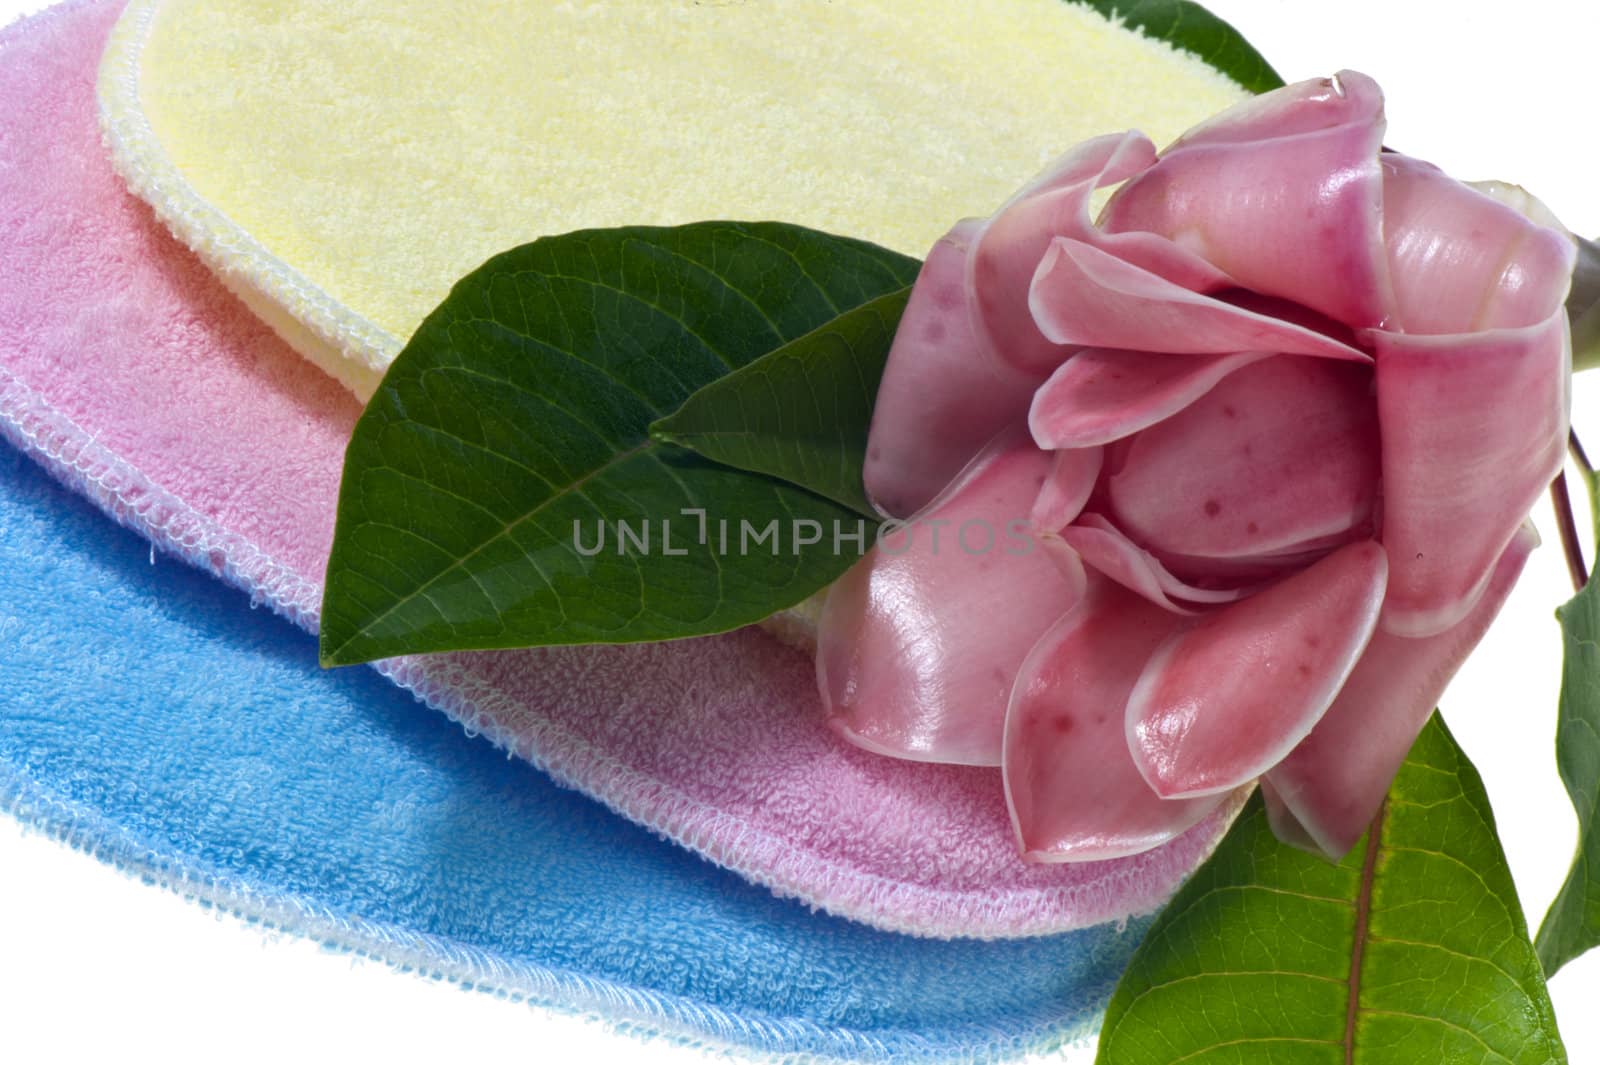 bath sponges in three different colors on white background